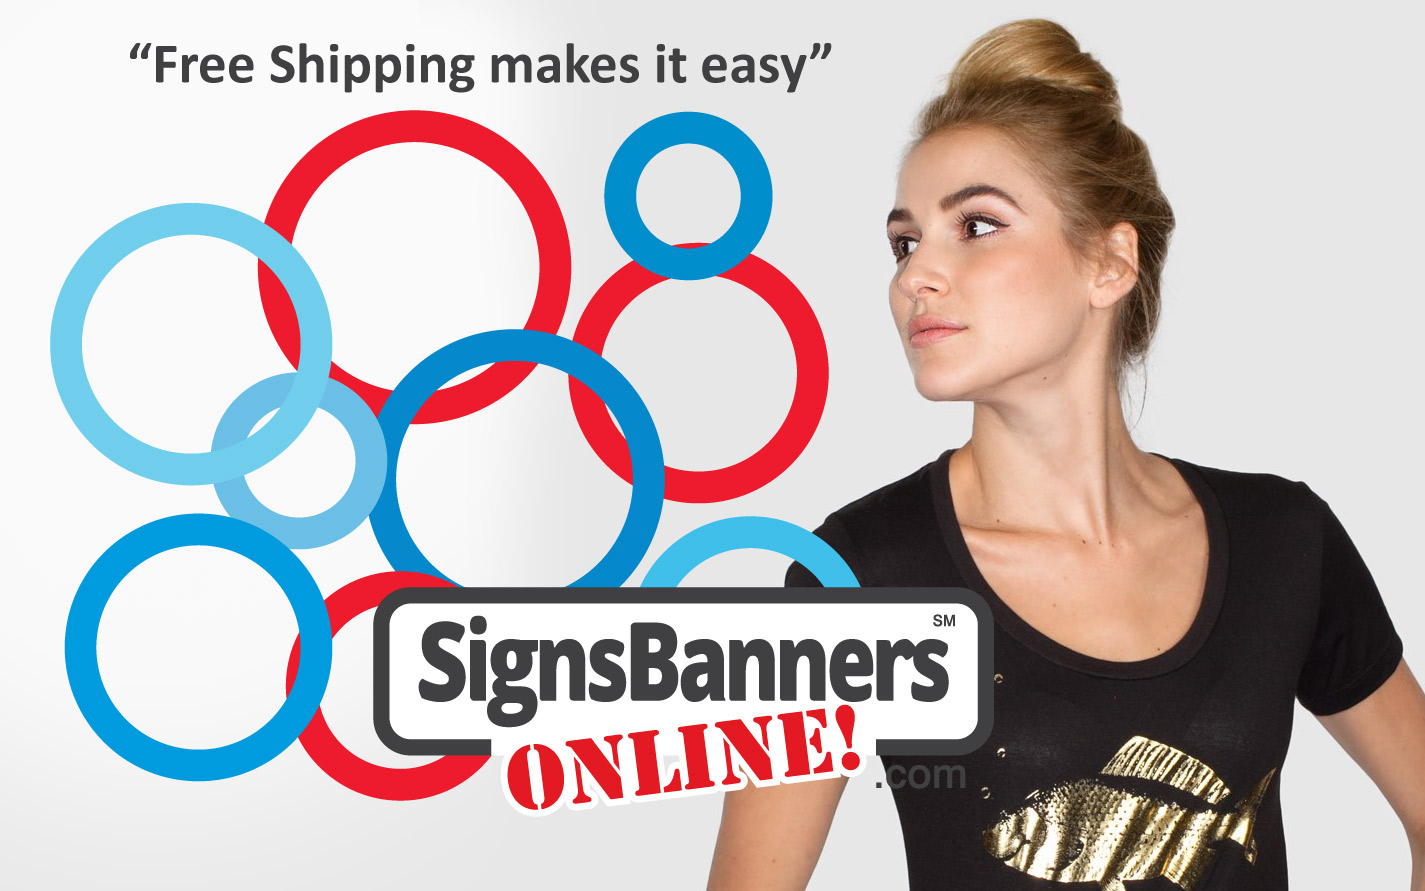 Free shipping worldwide makes it easy with Signs Banners Online